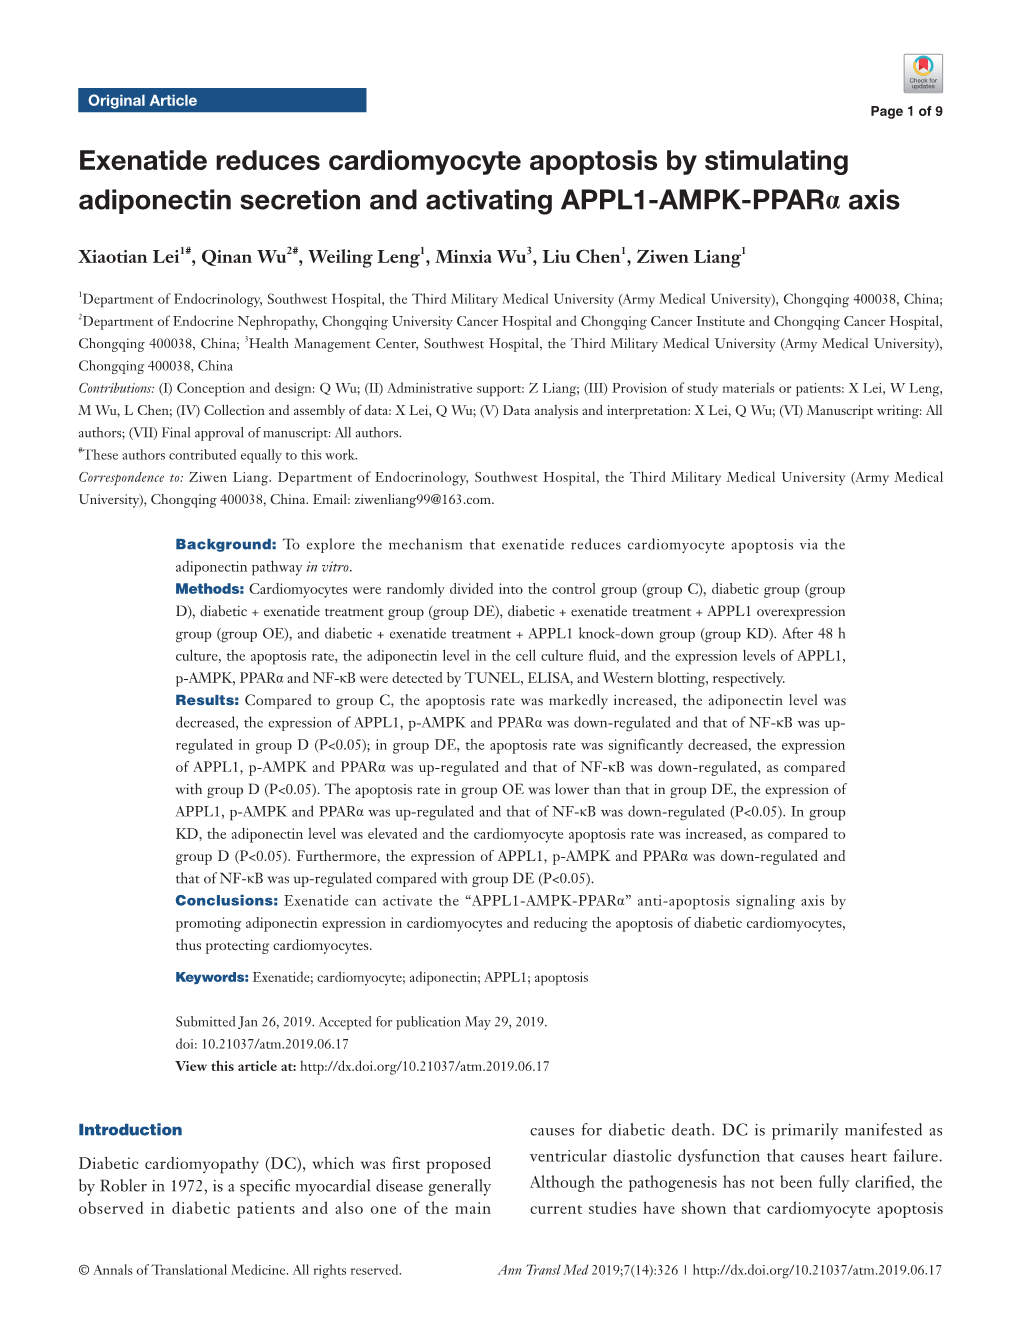 Exenatide Reduces Cardiomyocyte Apoptosis by Stimulating Adiponectin Secretion and Activating APPL1-AMPK-Pparα Axis